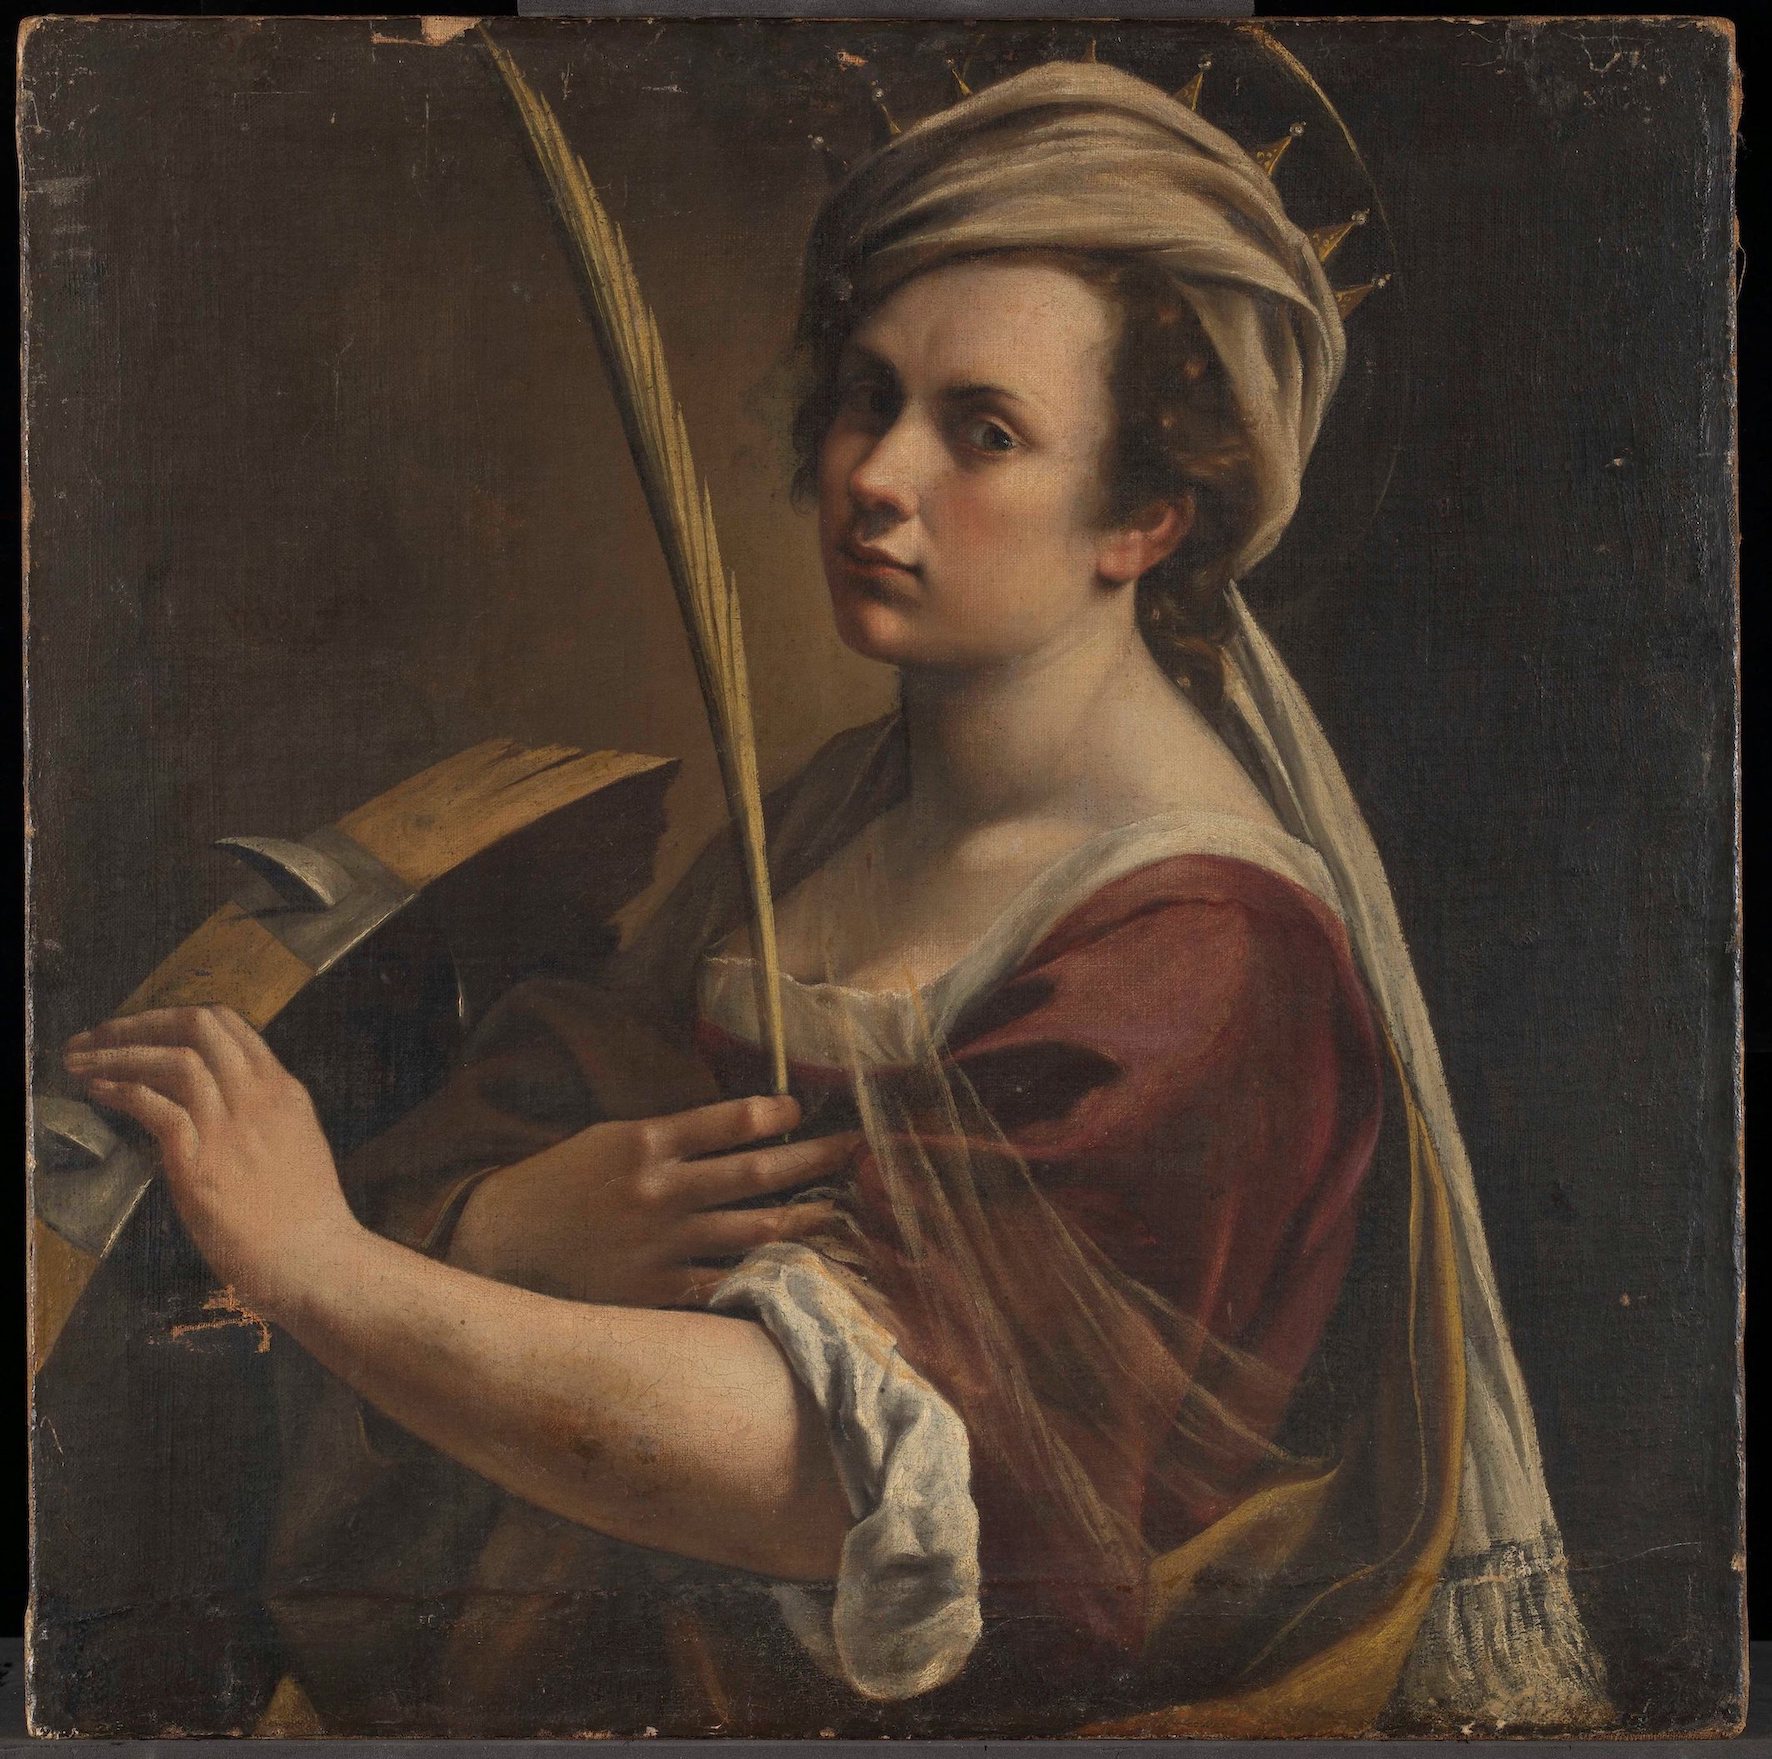 Artemisia Gentileschi (1593 – 1654 or later) Self Portrait as Saint Catherine of Alexandria about 1615-17 Oil on canvas 71.5 x 71 cm © The National Gallery, London